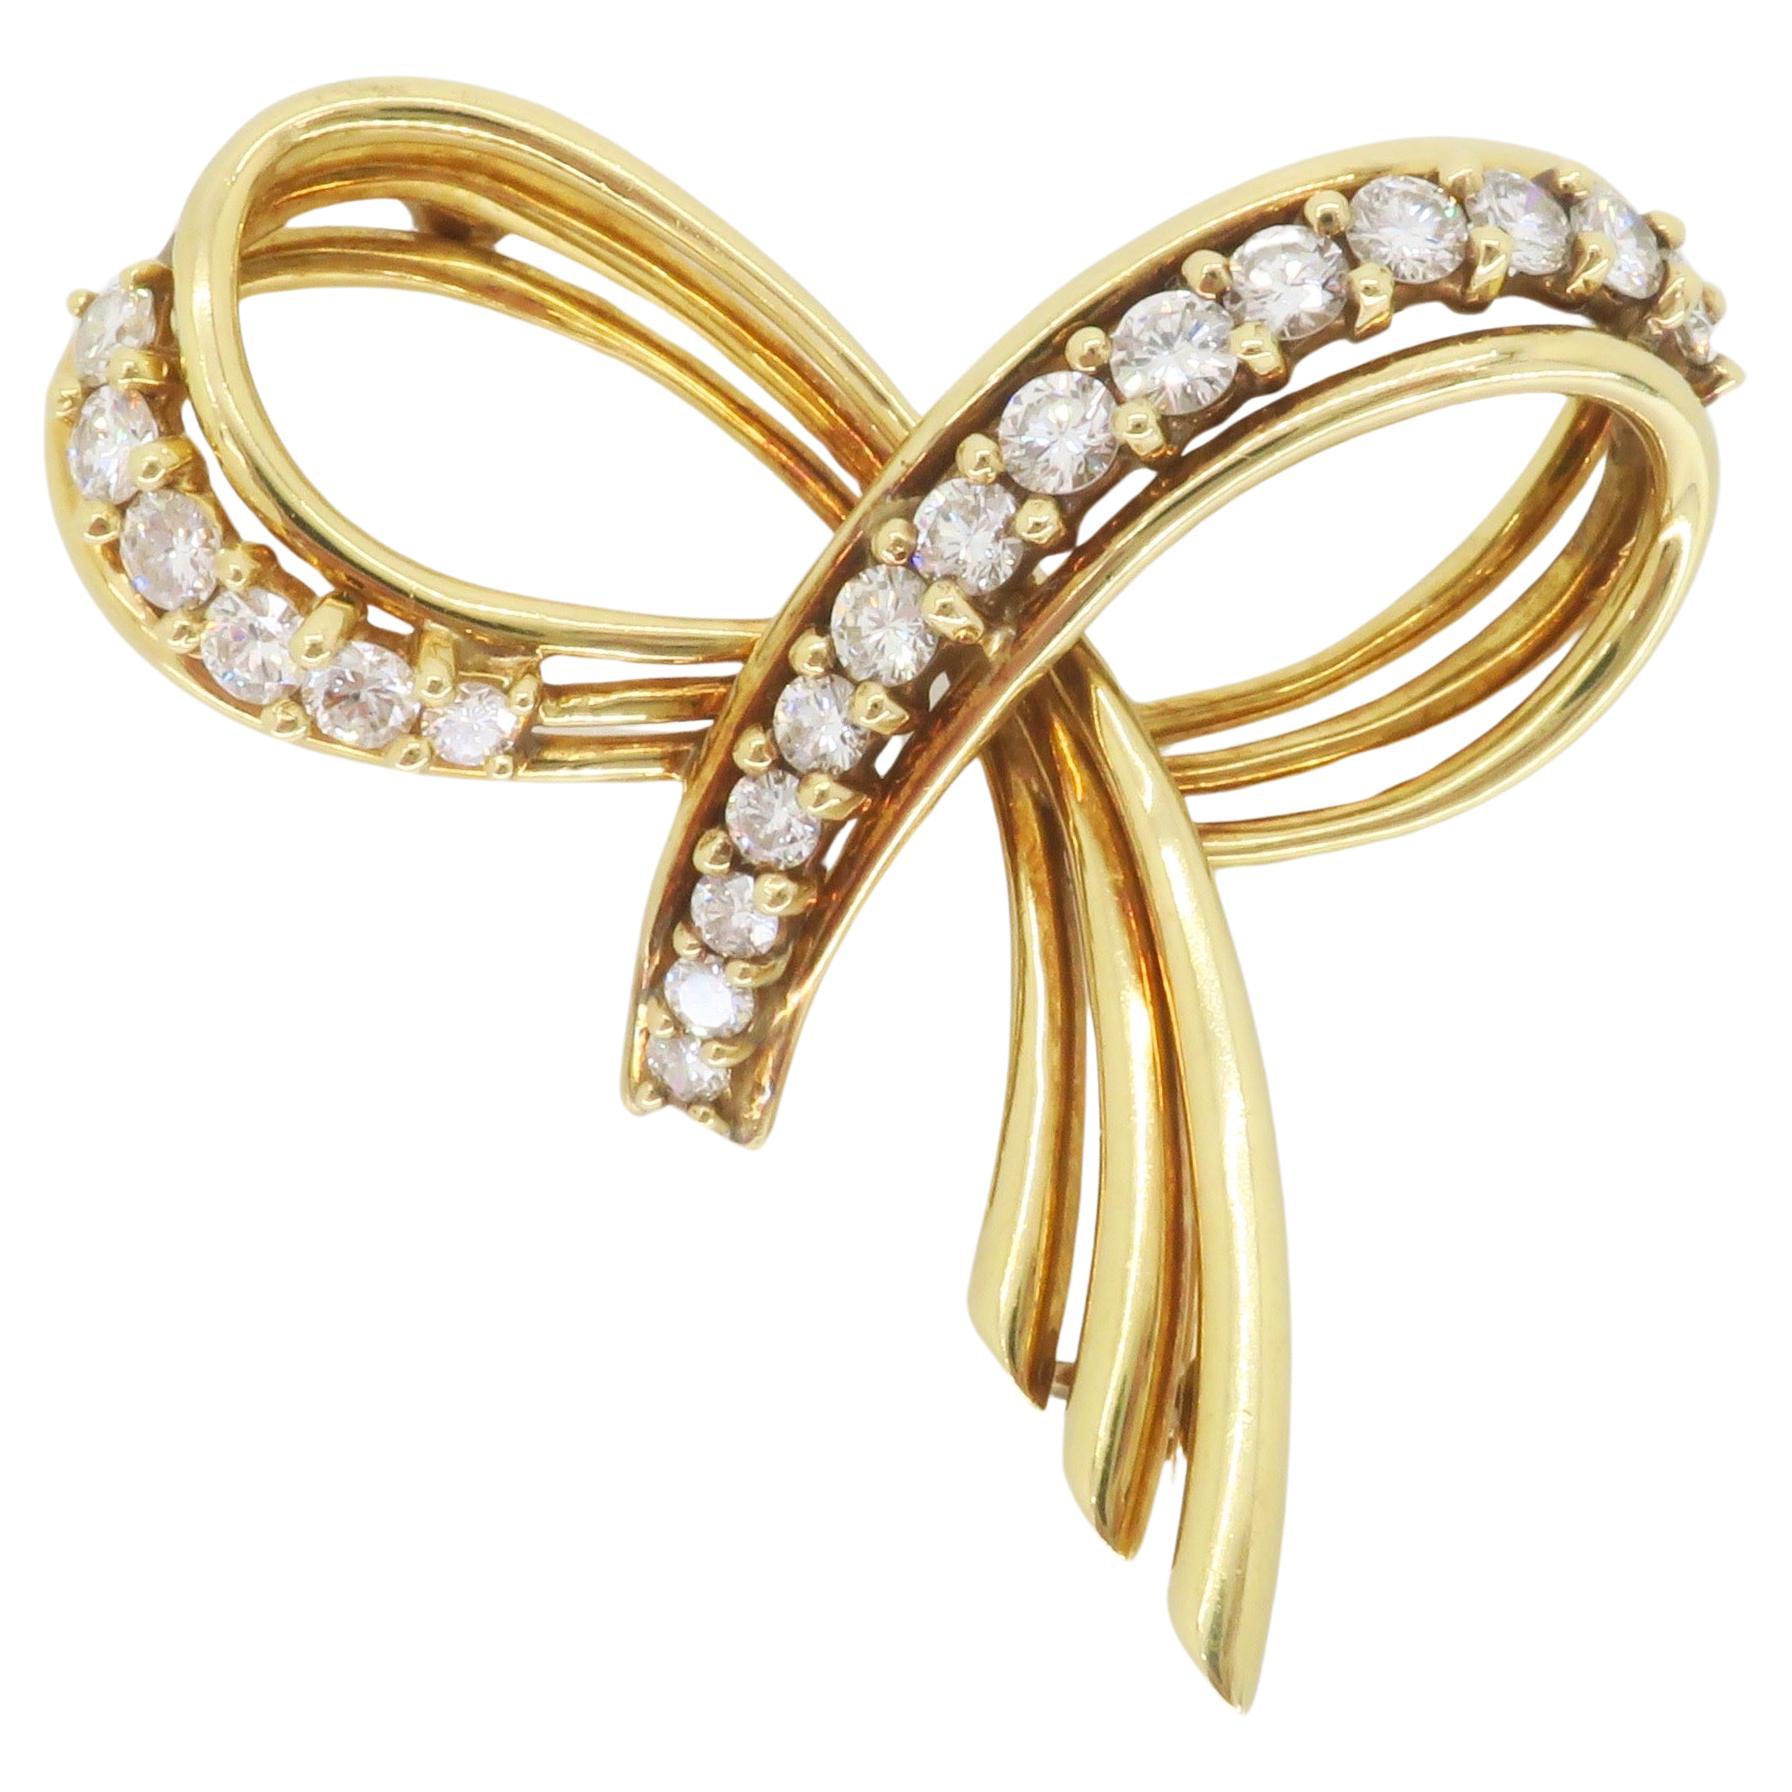 Vintage Tiffany & Co. Diamond Bow Brooch in 18k Yellow Gold  For Sale